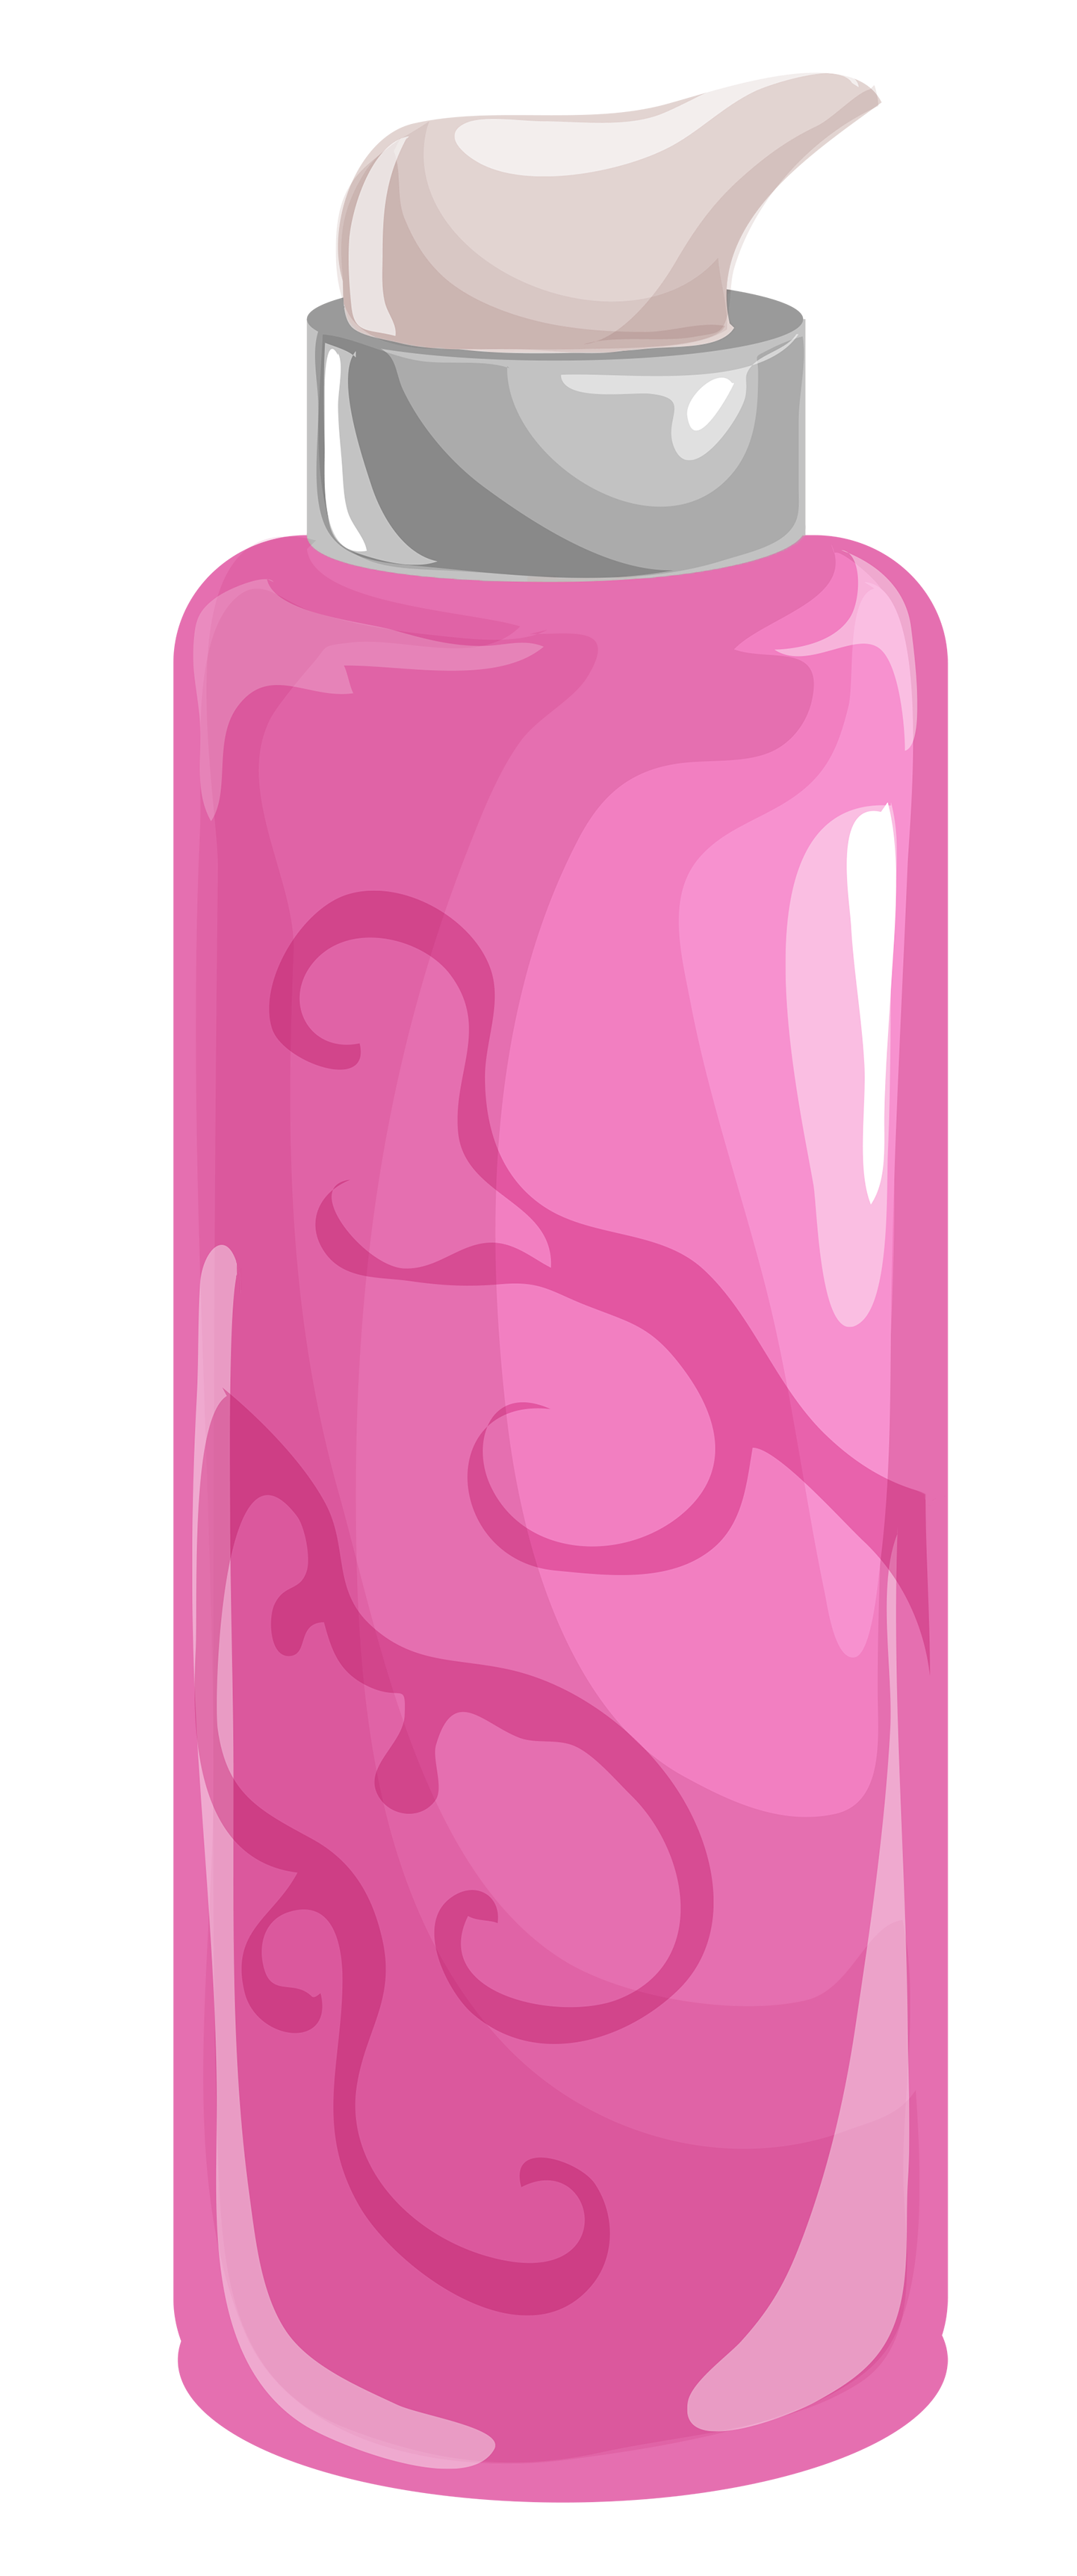 Lotion bottle png. Clipart picture gallery yopriceville